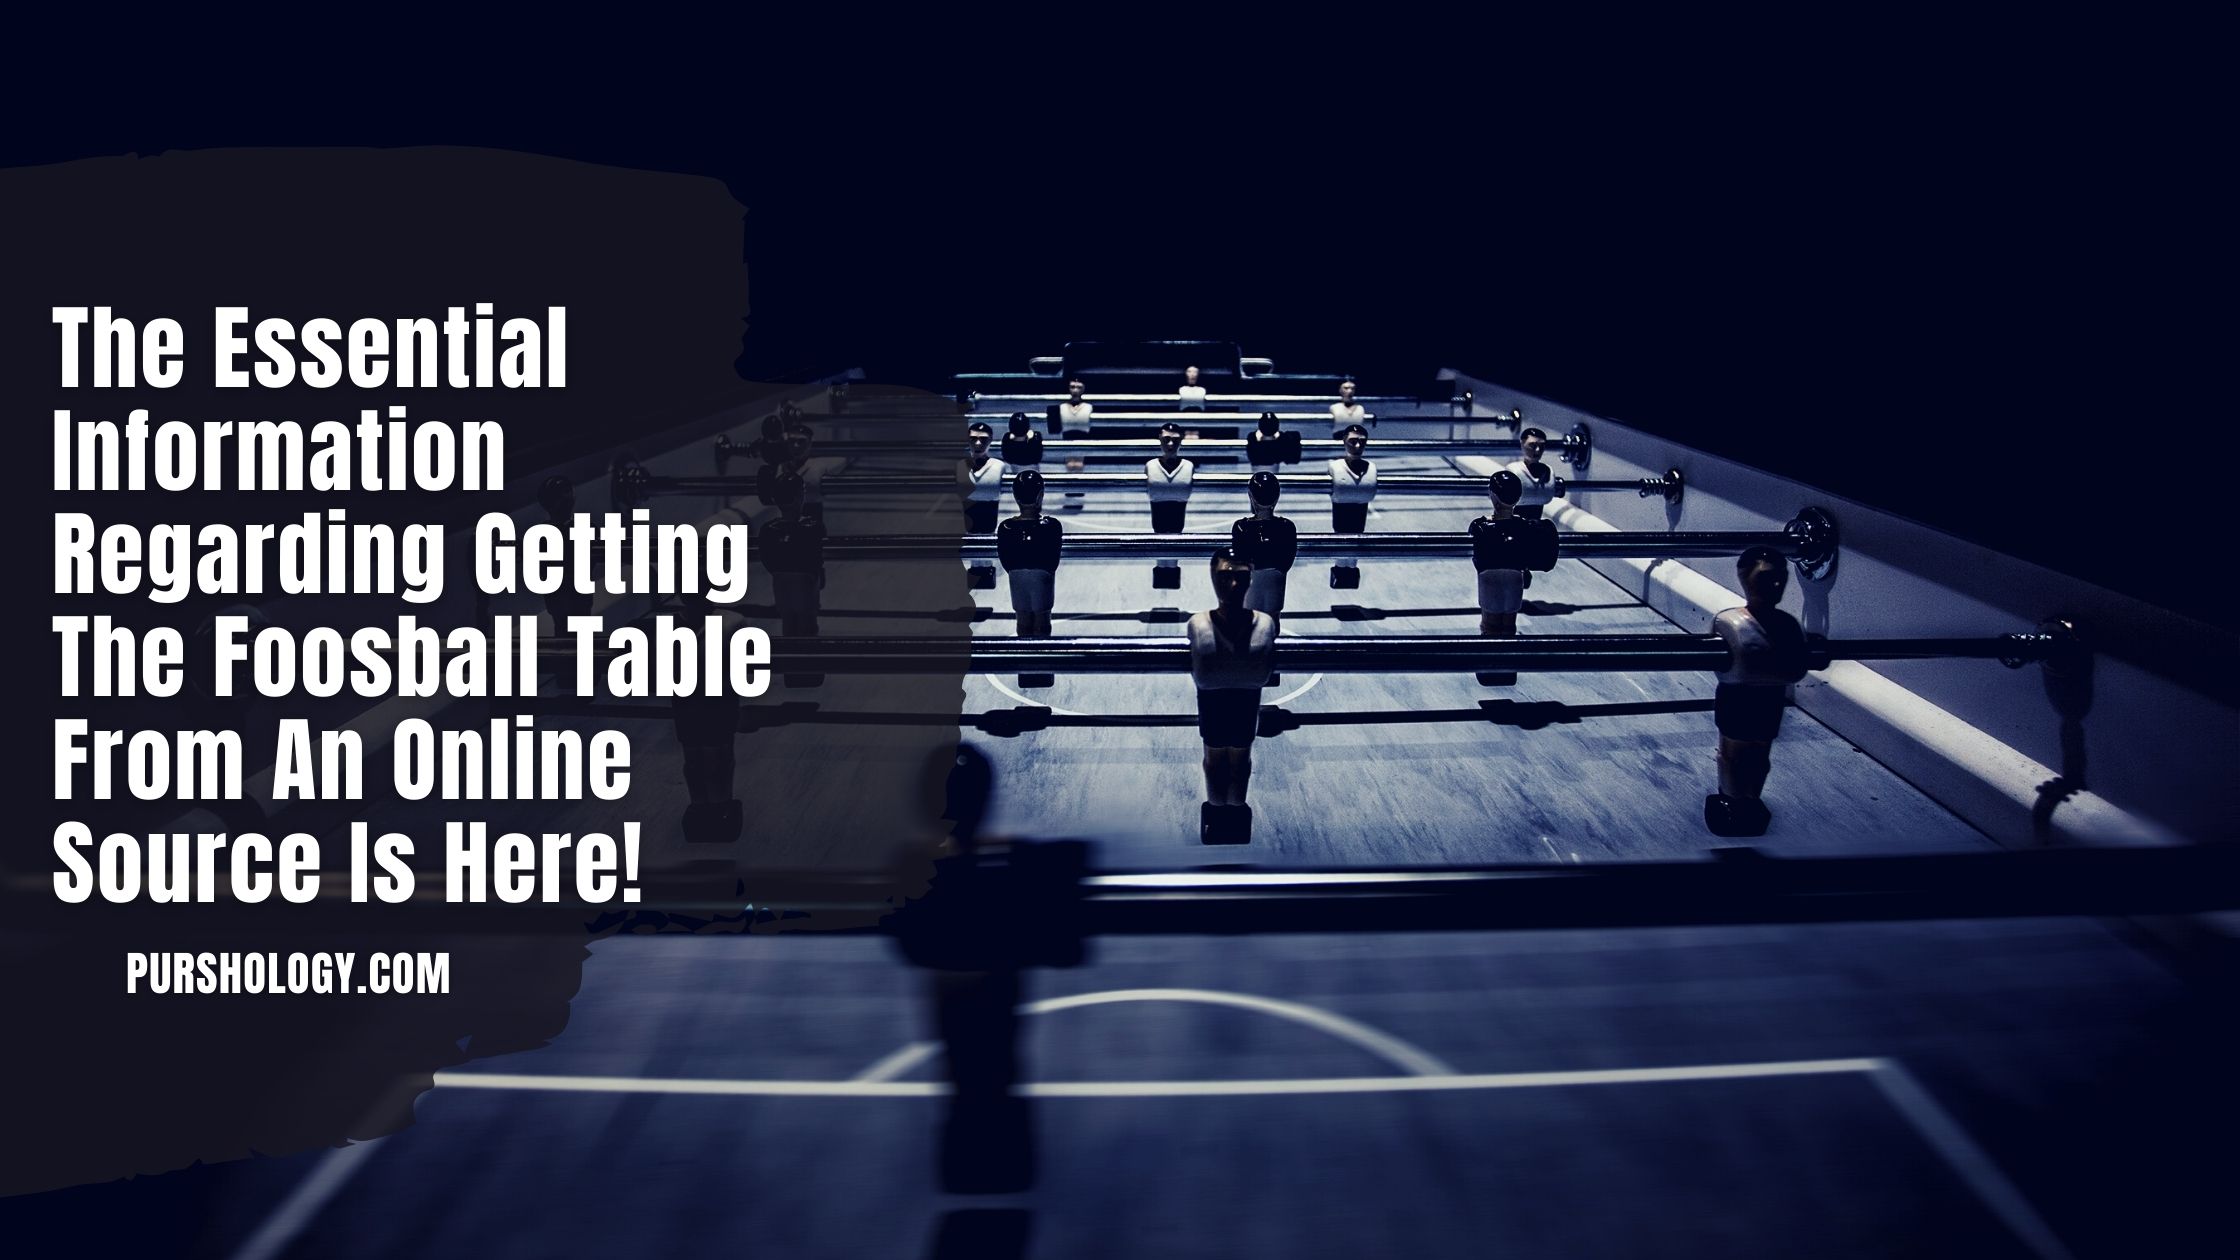 The Essential Information Regarding Getting The Foosball Table From An Online Source Is Here!